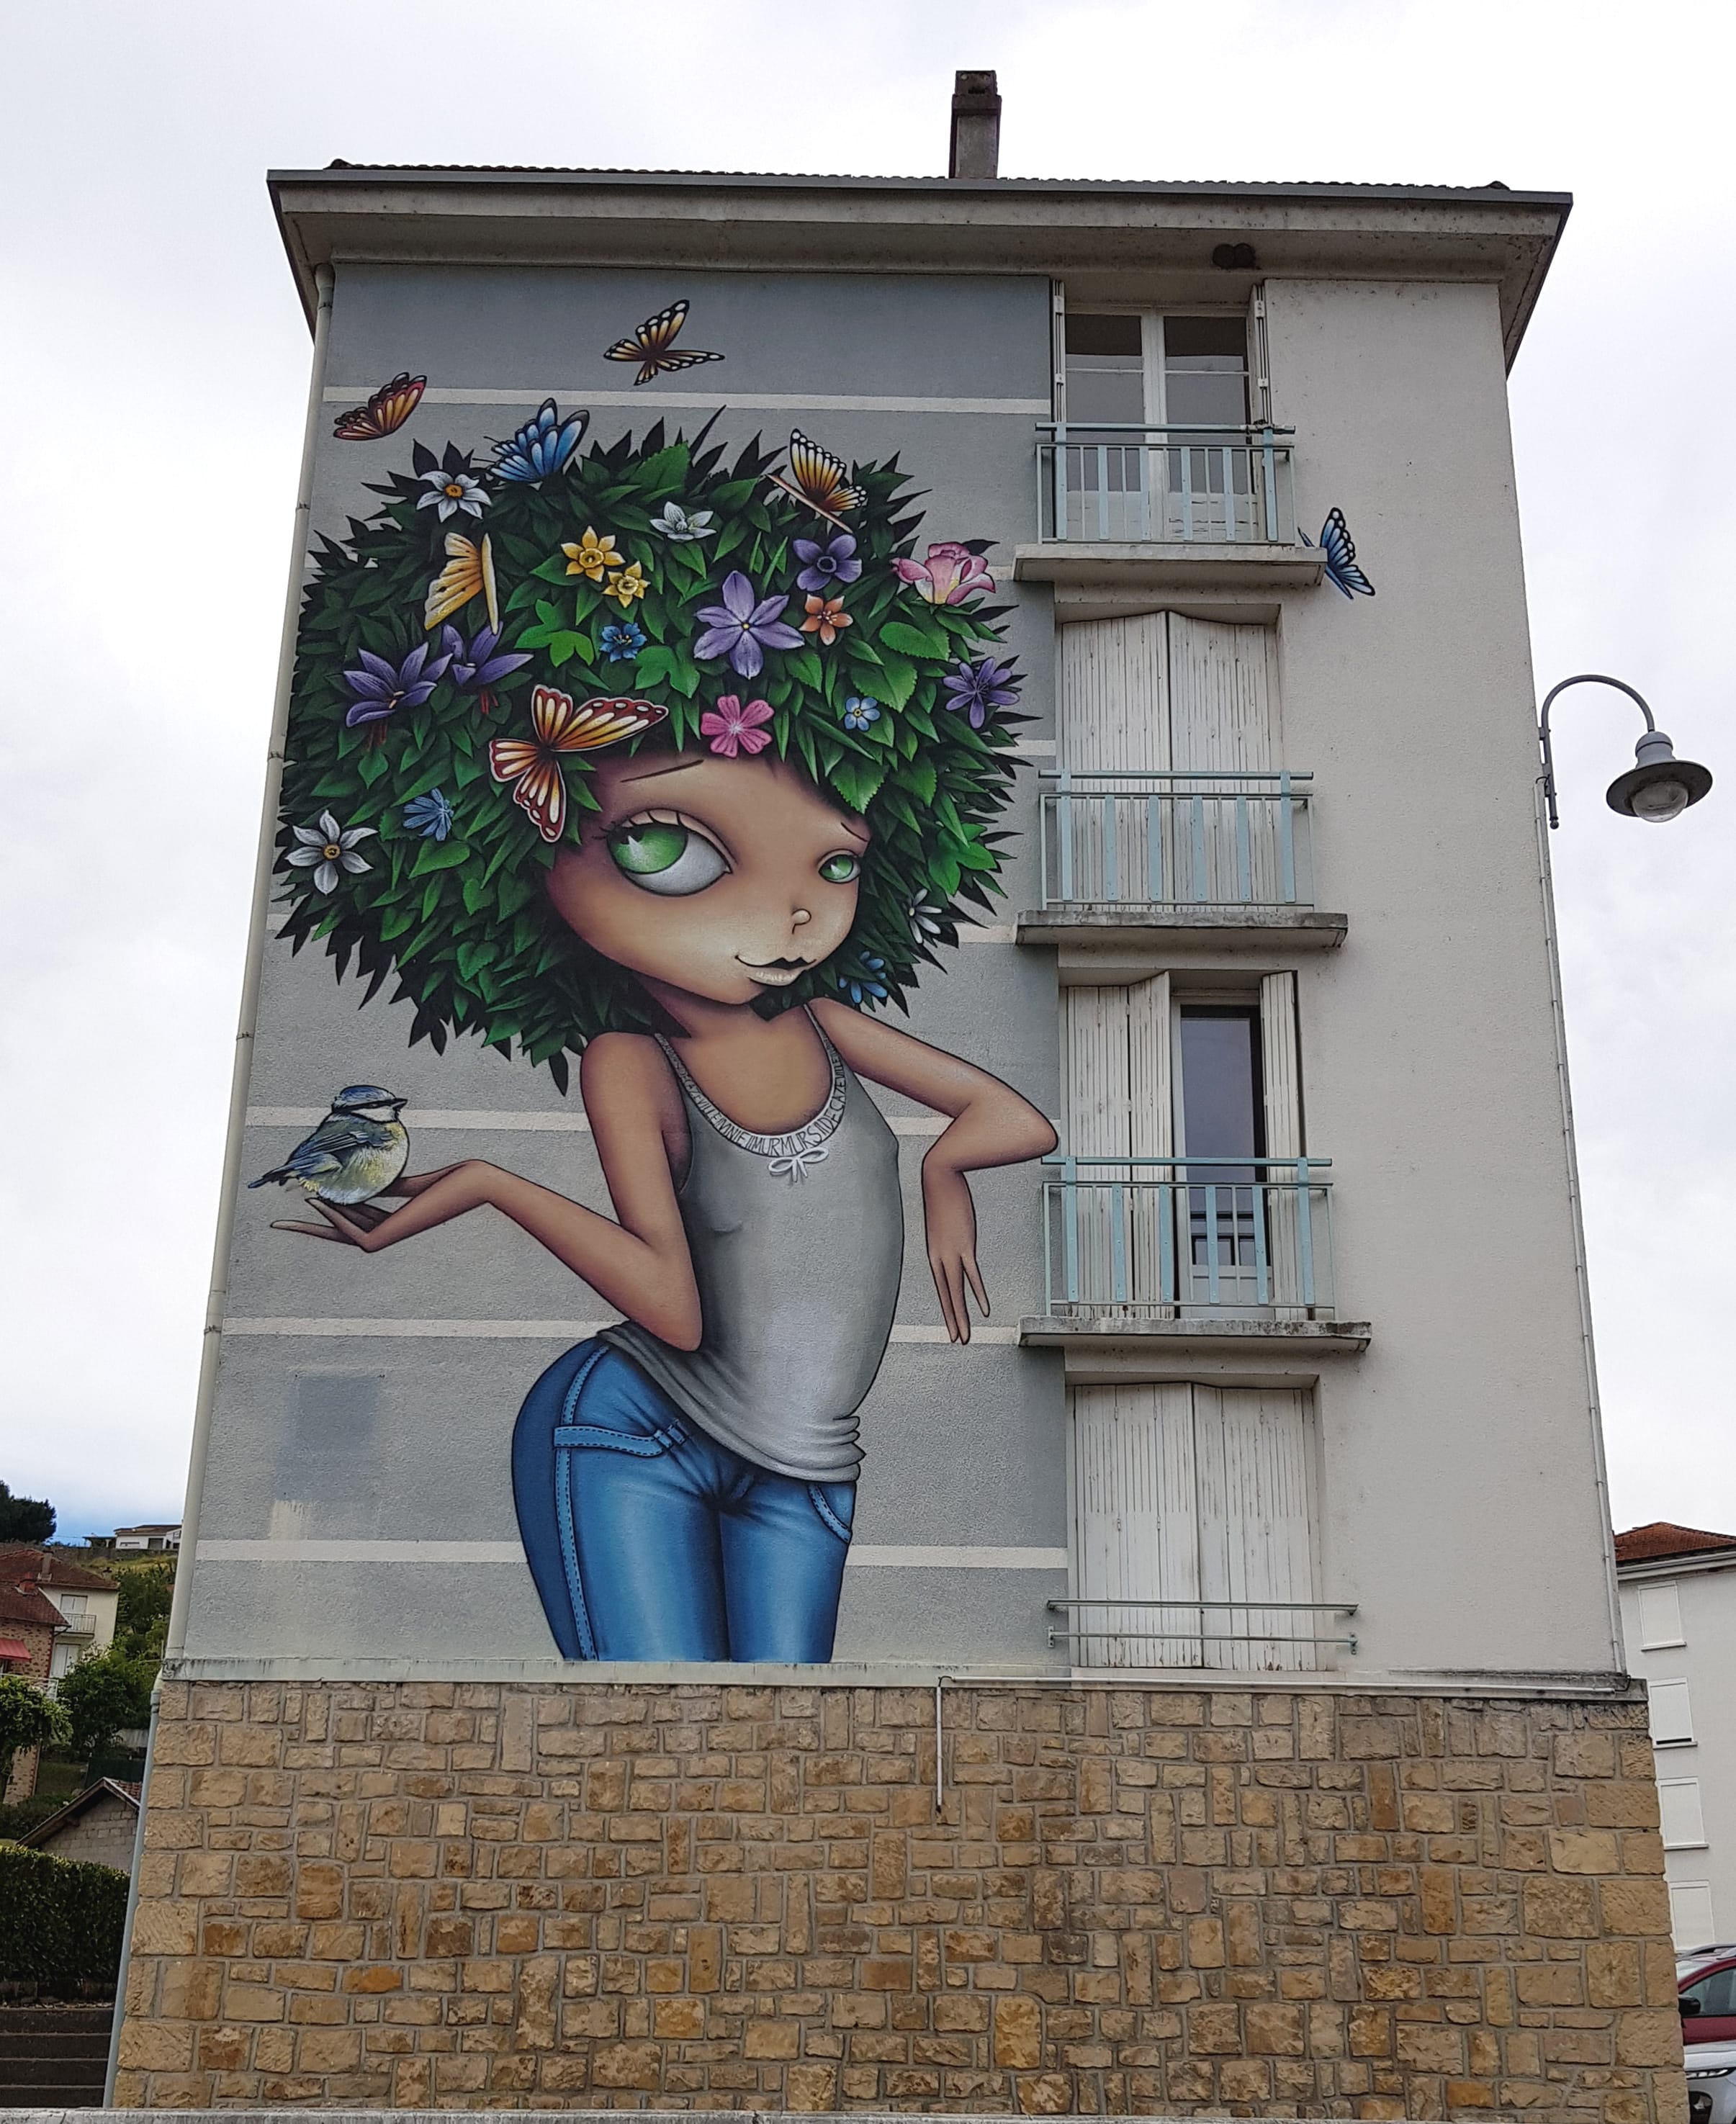 Graffiti 6287  by the artist Vinie captured by Mephisroth in Decazeville France